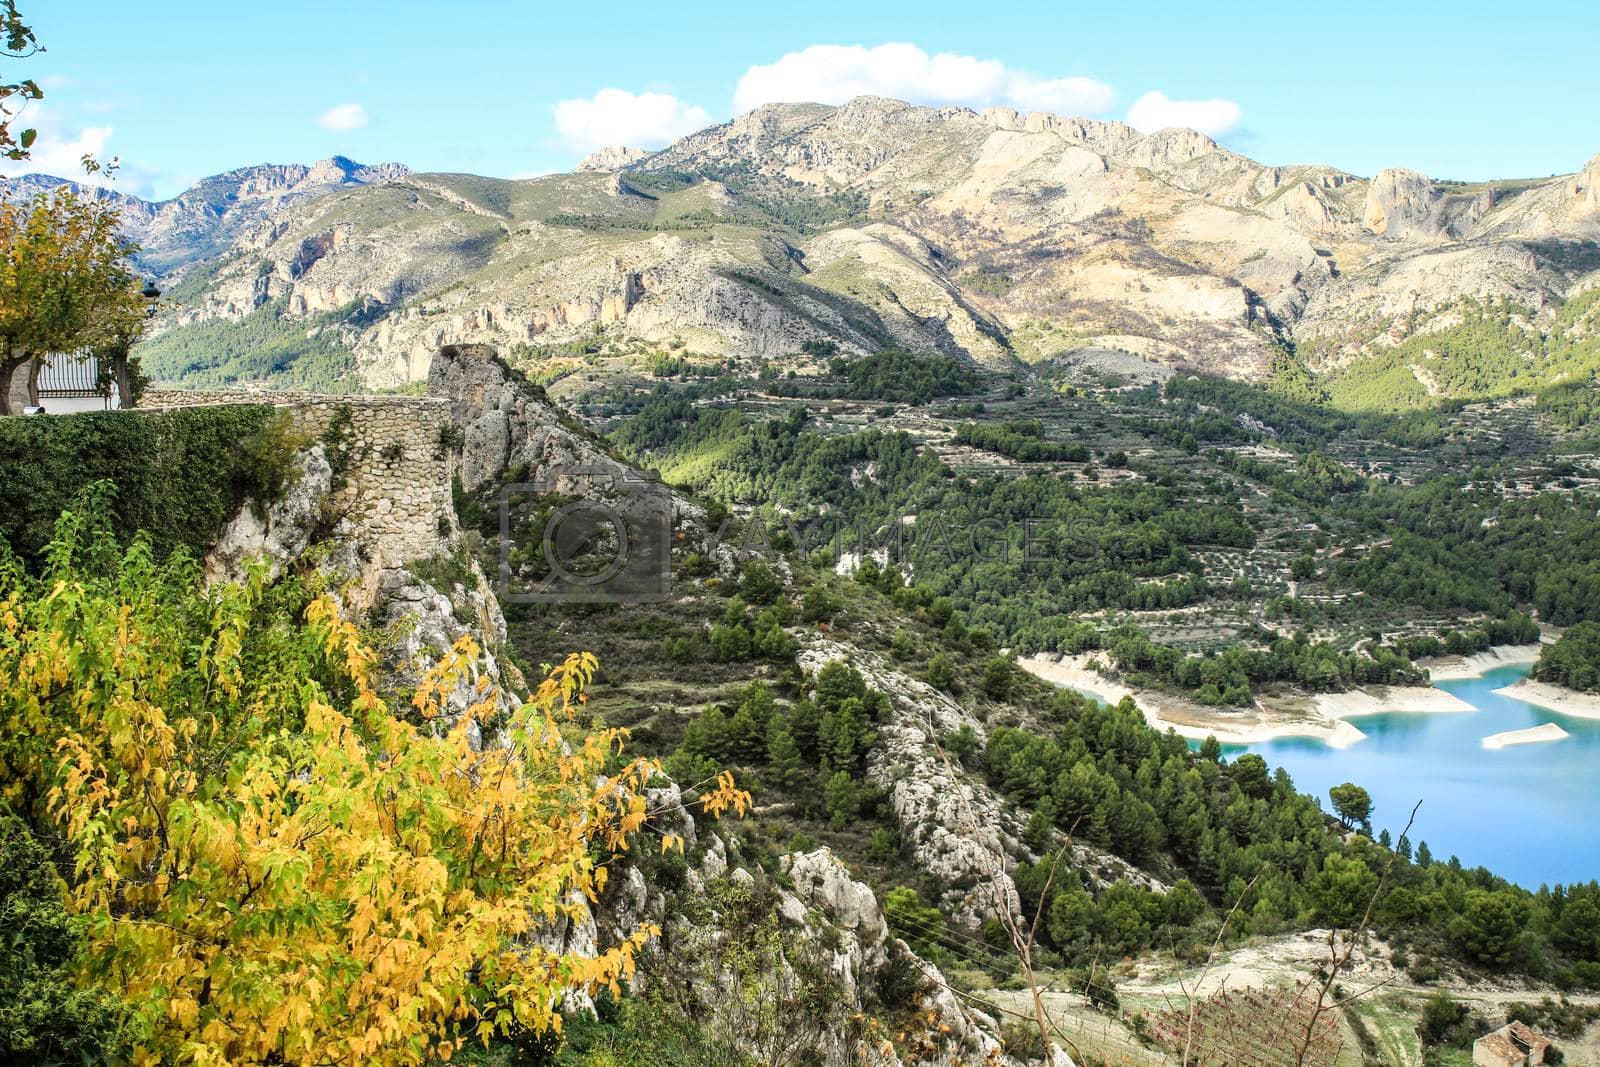 Royalty free image of Guadalest village surrounded by vegetation and the Castle by soniabonet